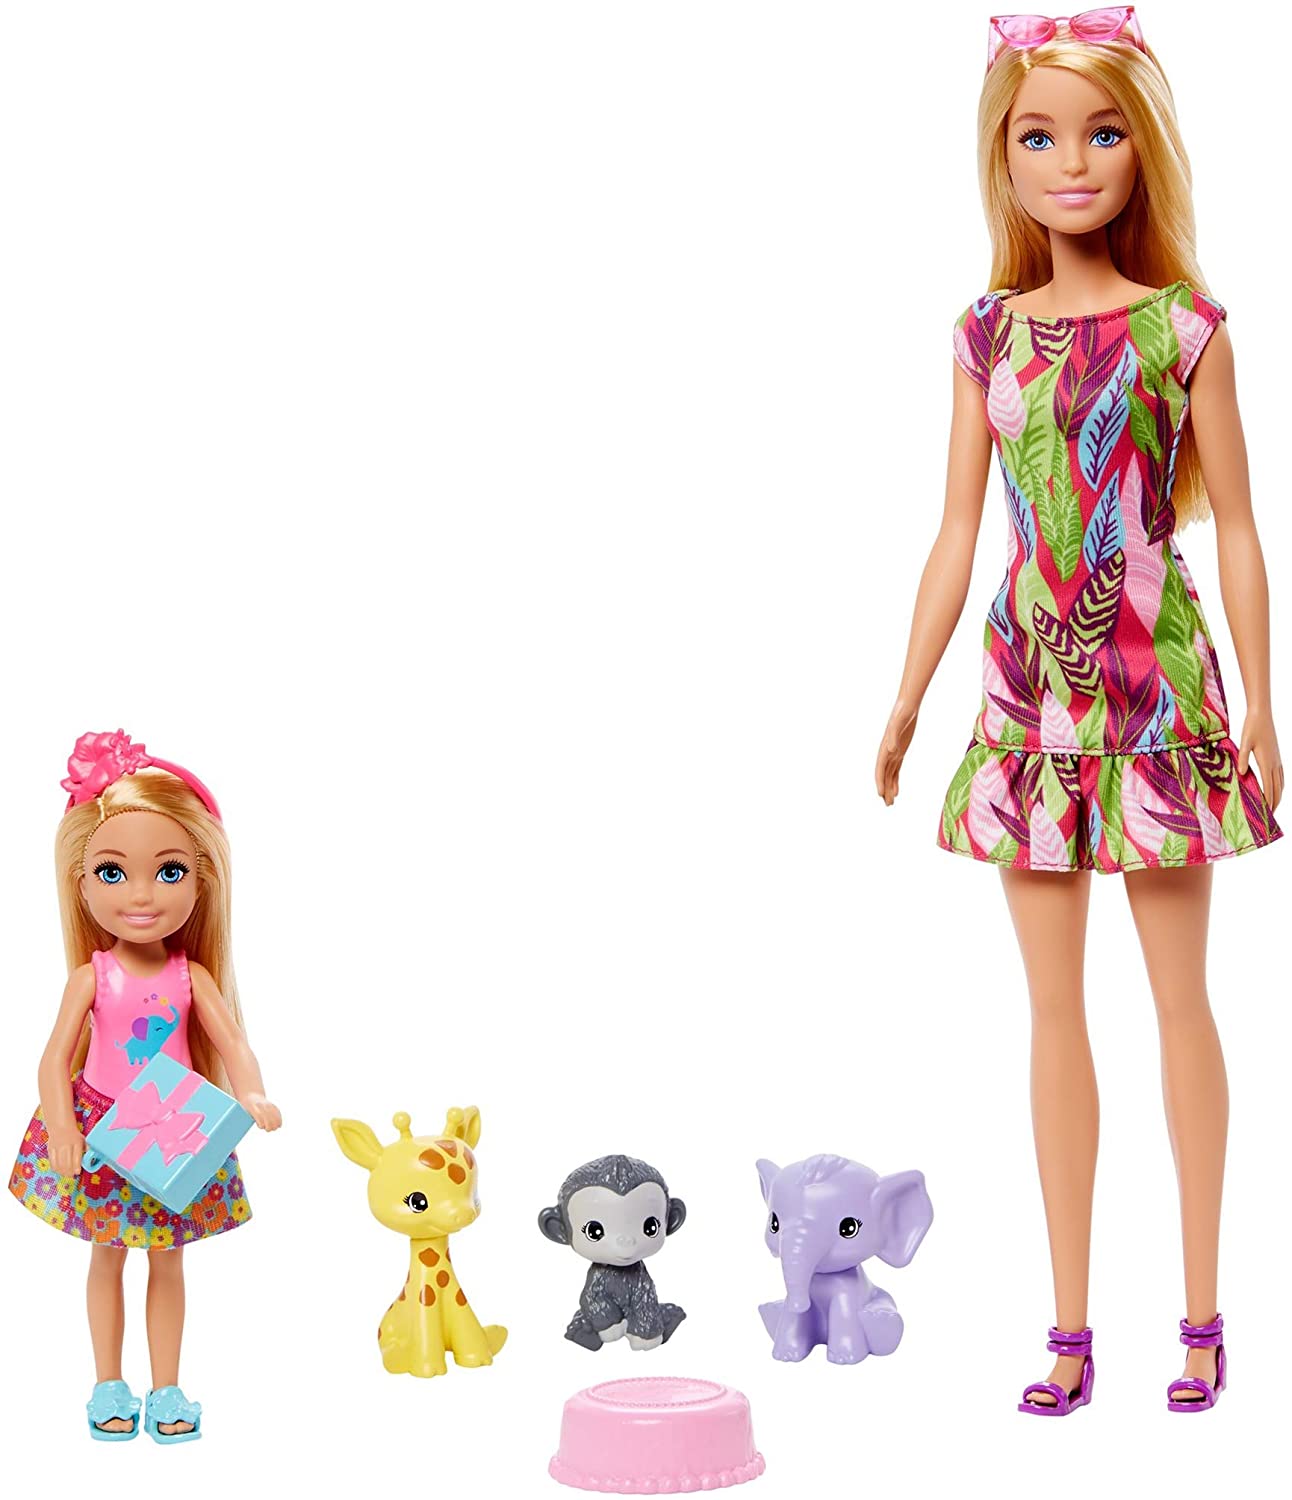 Barbie and Chelsea The Lost Birthday Playset with Barbie & Chelsea Dolls, 3 Pets & Accessories, Gift for 3 to 7 Year Olds, Toys & Games